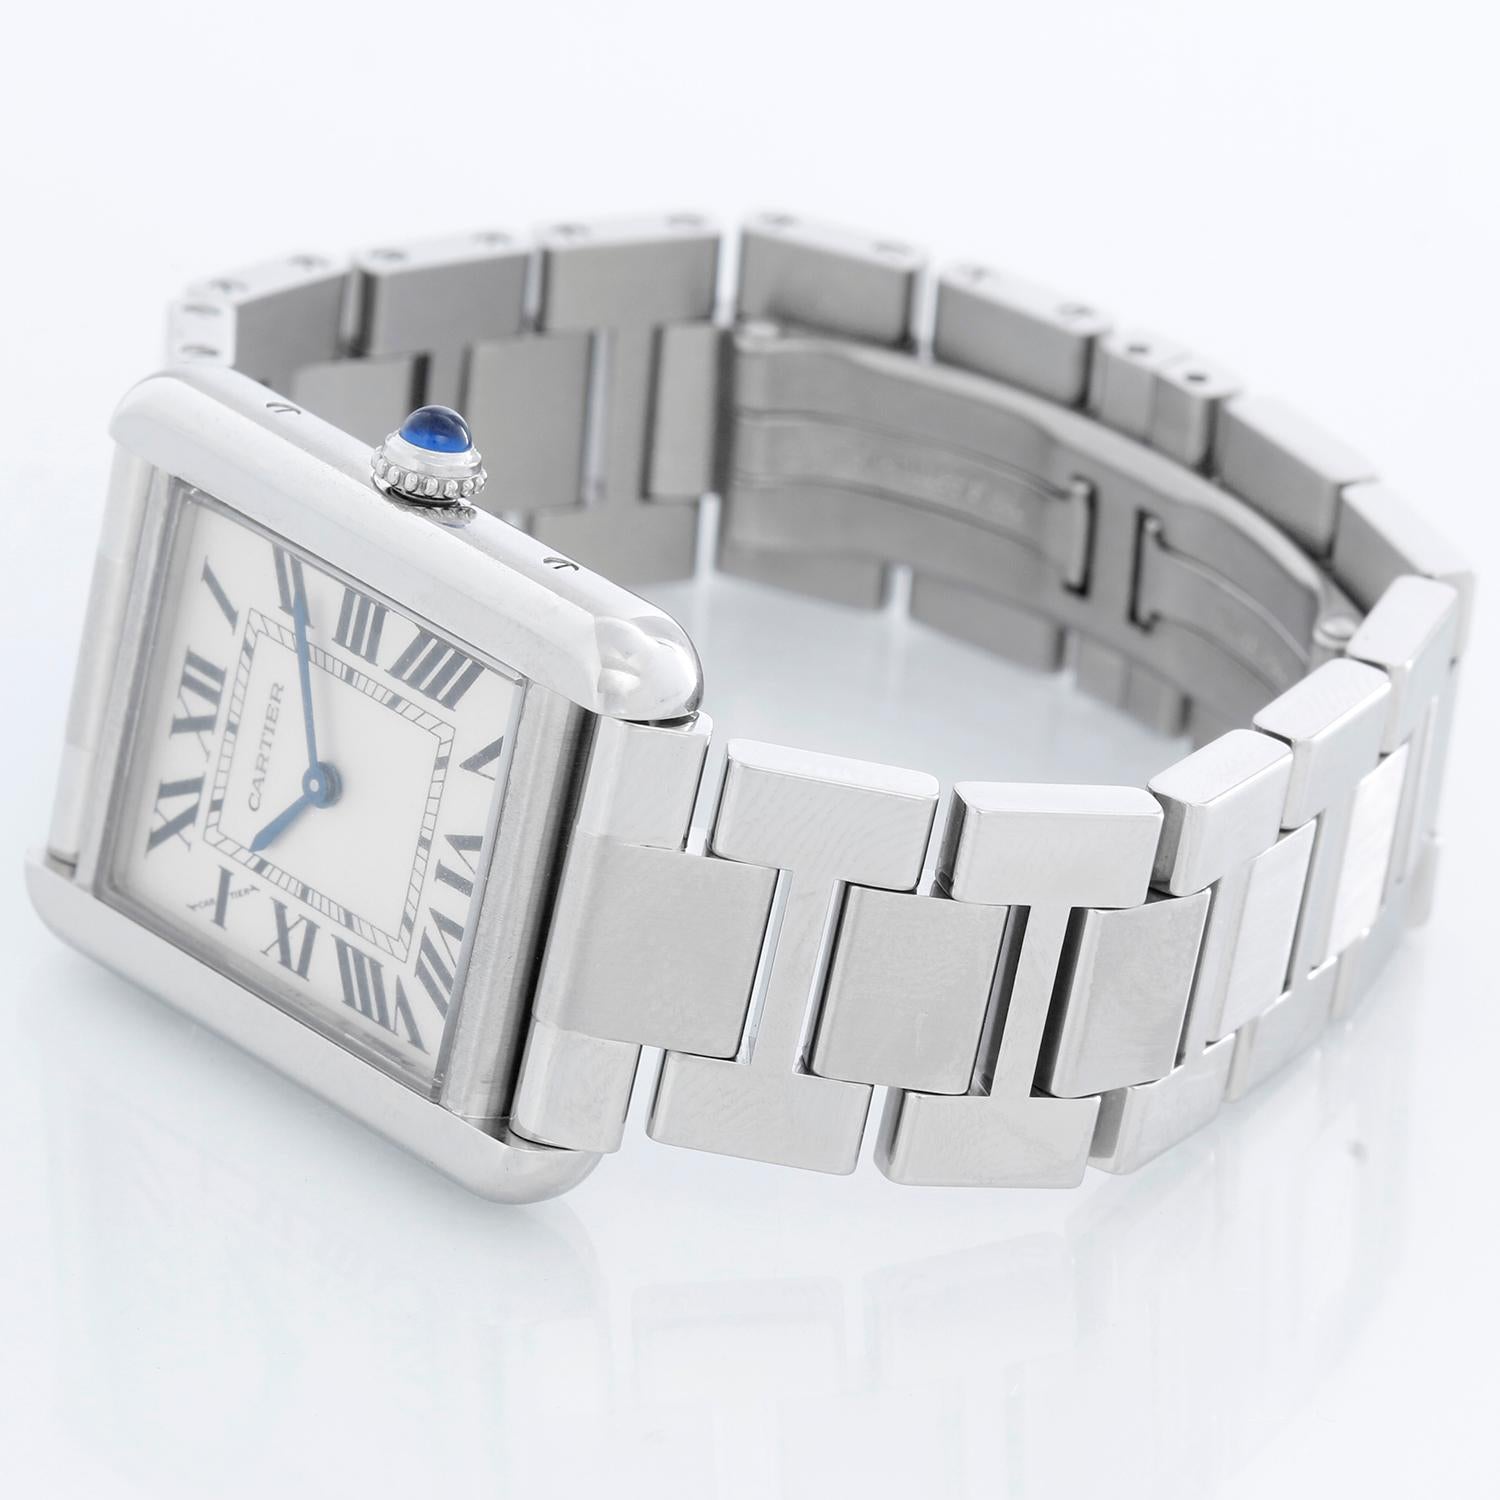 Ladies Cartier Tank Solo Stainless Steel Watch W5200013 3170 - Quartz. Stainless steel case (24mm x 30mm). Silver dial with black Roman numerals. Stainless steel bracelet (will fit apx. 6 1/4 inch wrist). Pre-owned with Cartier box. 